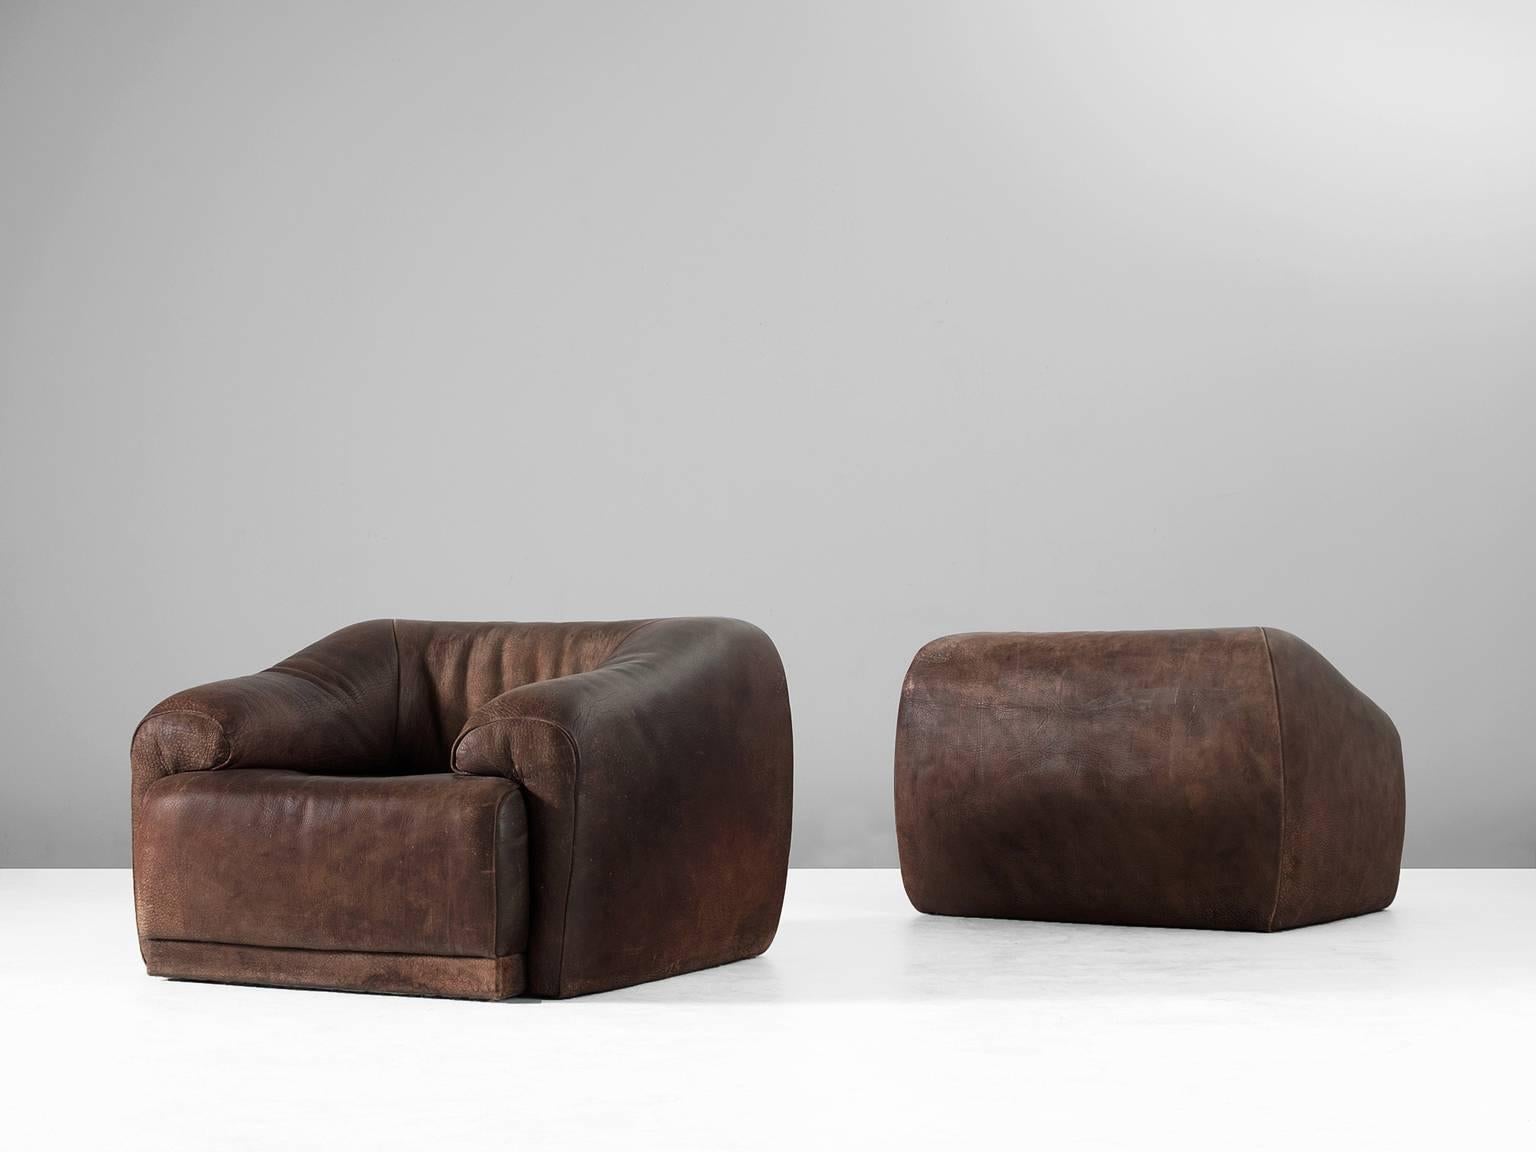 Set of lounge chairs, in leather,by De Sede Switzerland, 1970s.

Sturdy and highly comfortable lounge chairs in dark brown leather. These cubic chairs have a real masculine appearance. The back and armrest run smoothly over into each other and are